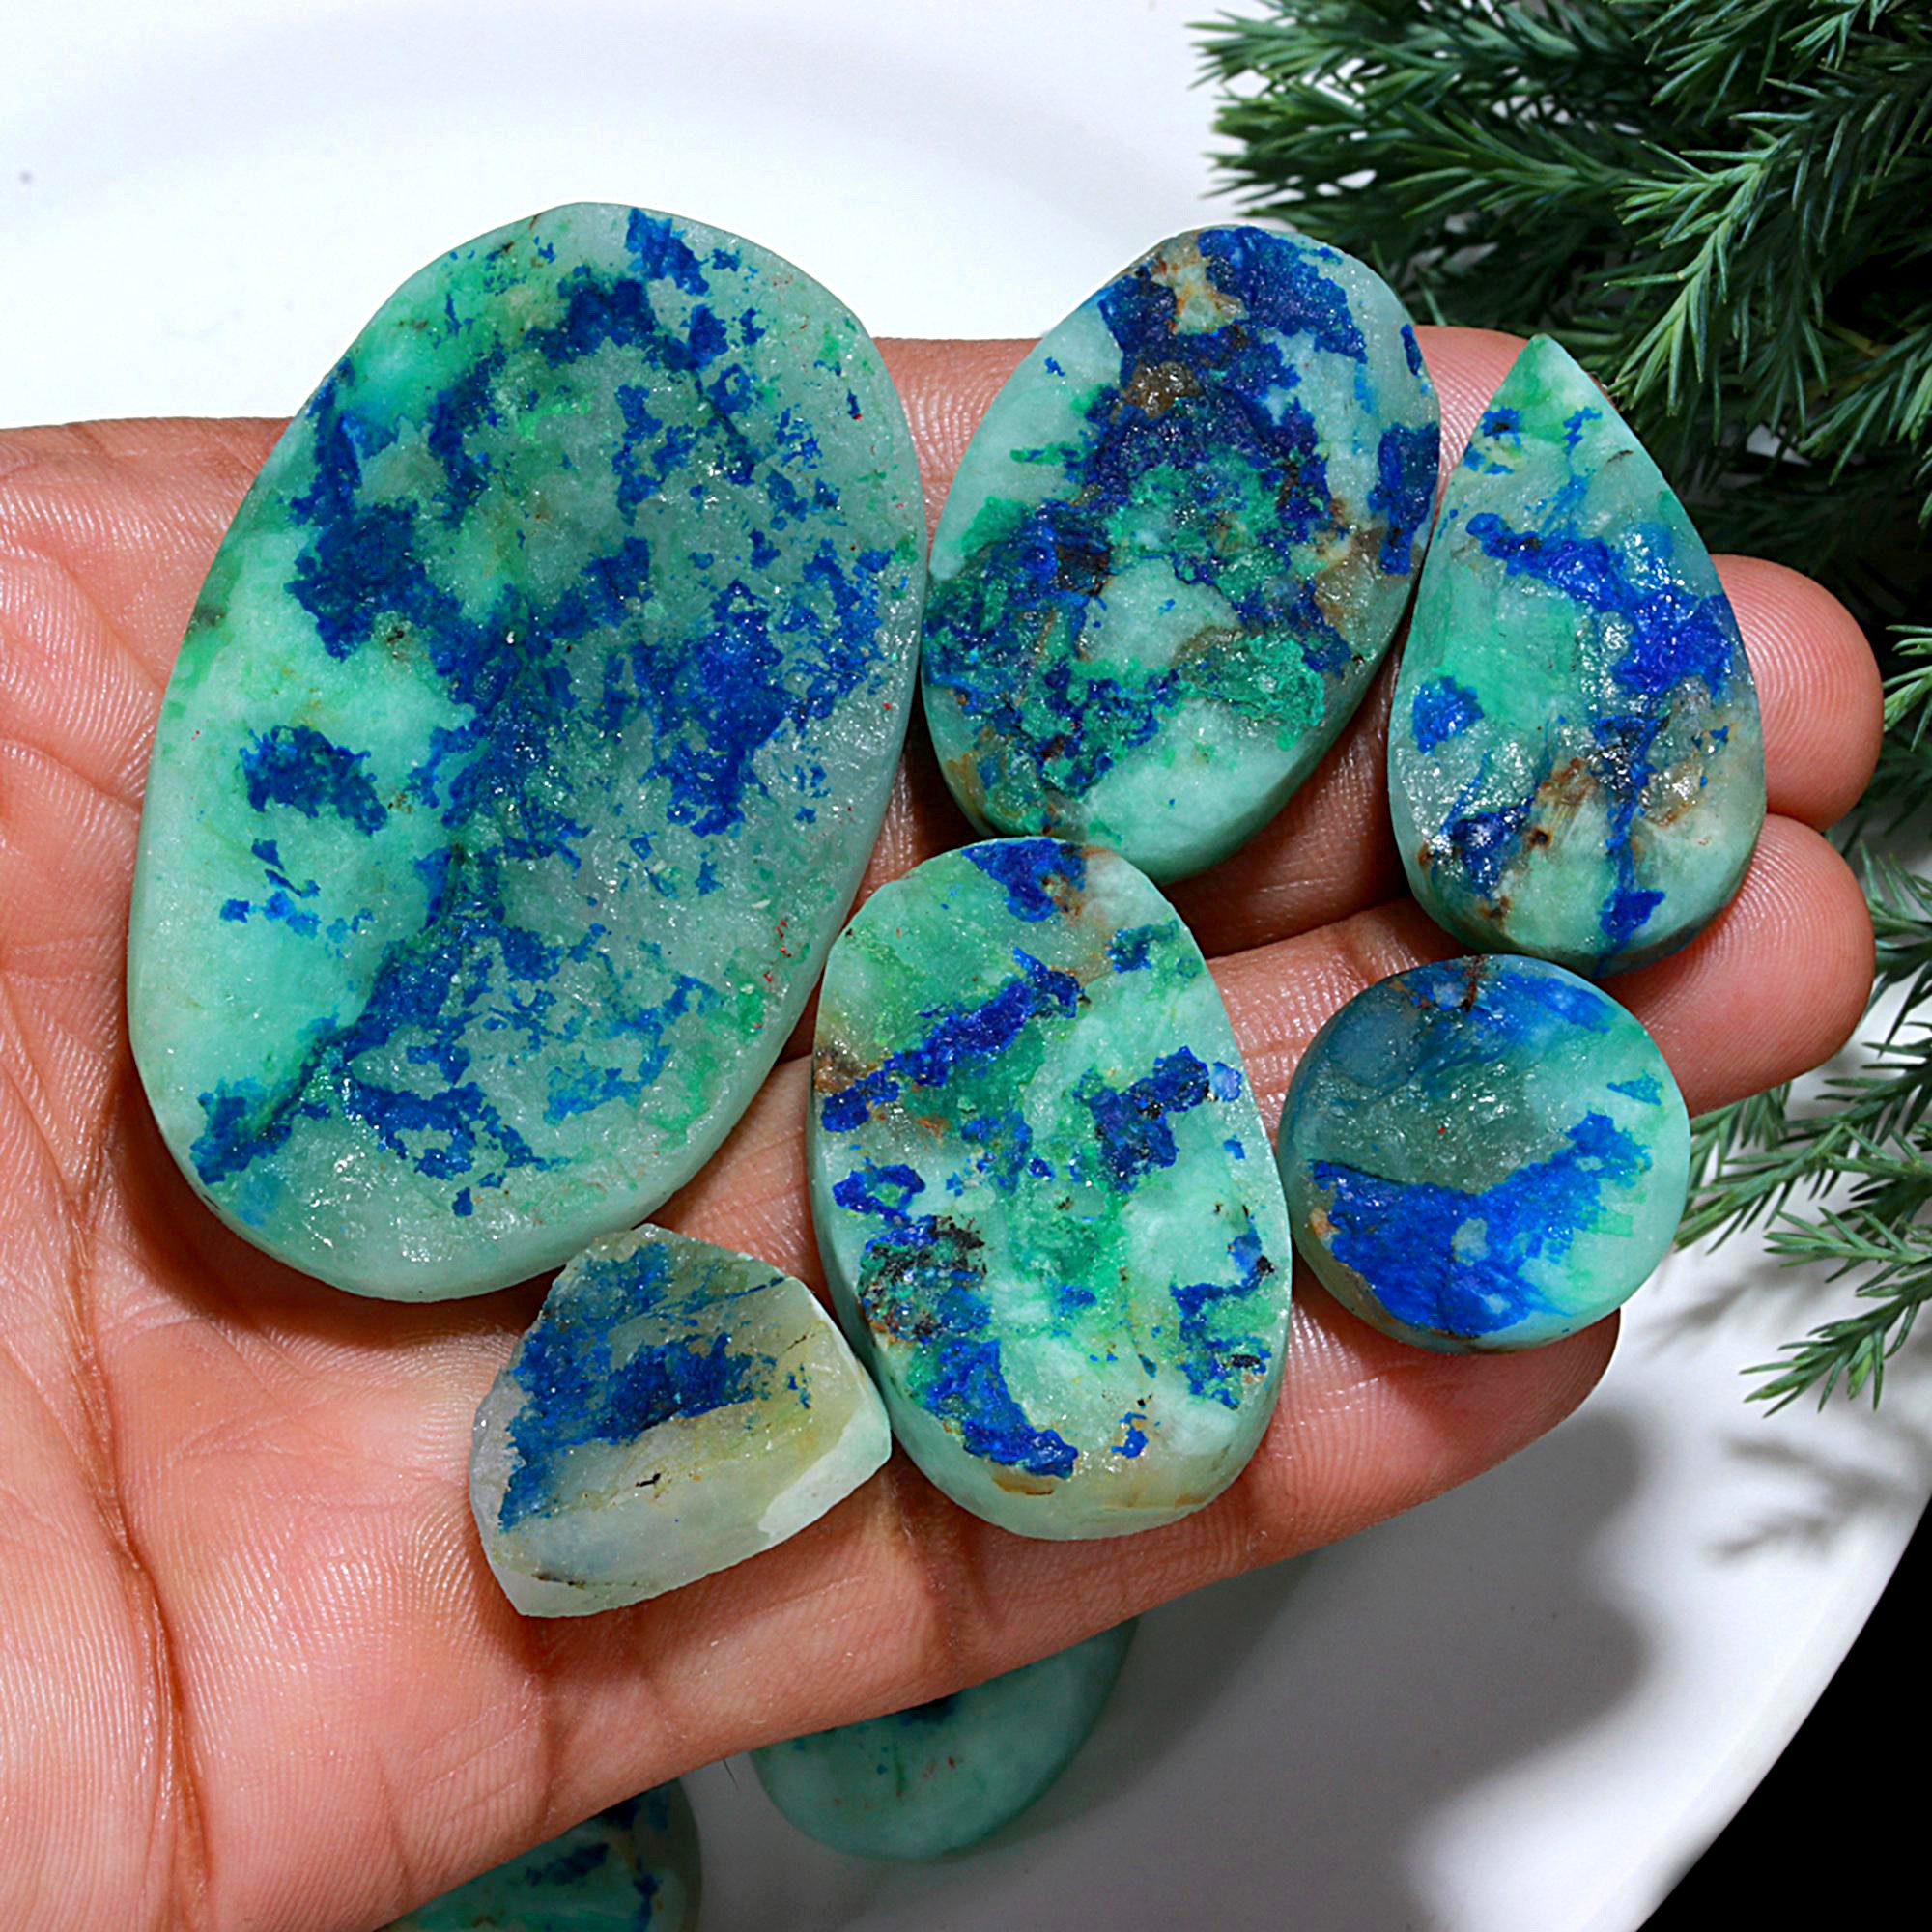 17 Pcs 580.Cts Natural Azurite Druzy Unpolished Loose Cabochon Gemstone For Jewelry Wholesale Lot Size 53x33 19x20mm#1179